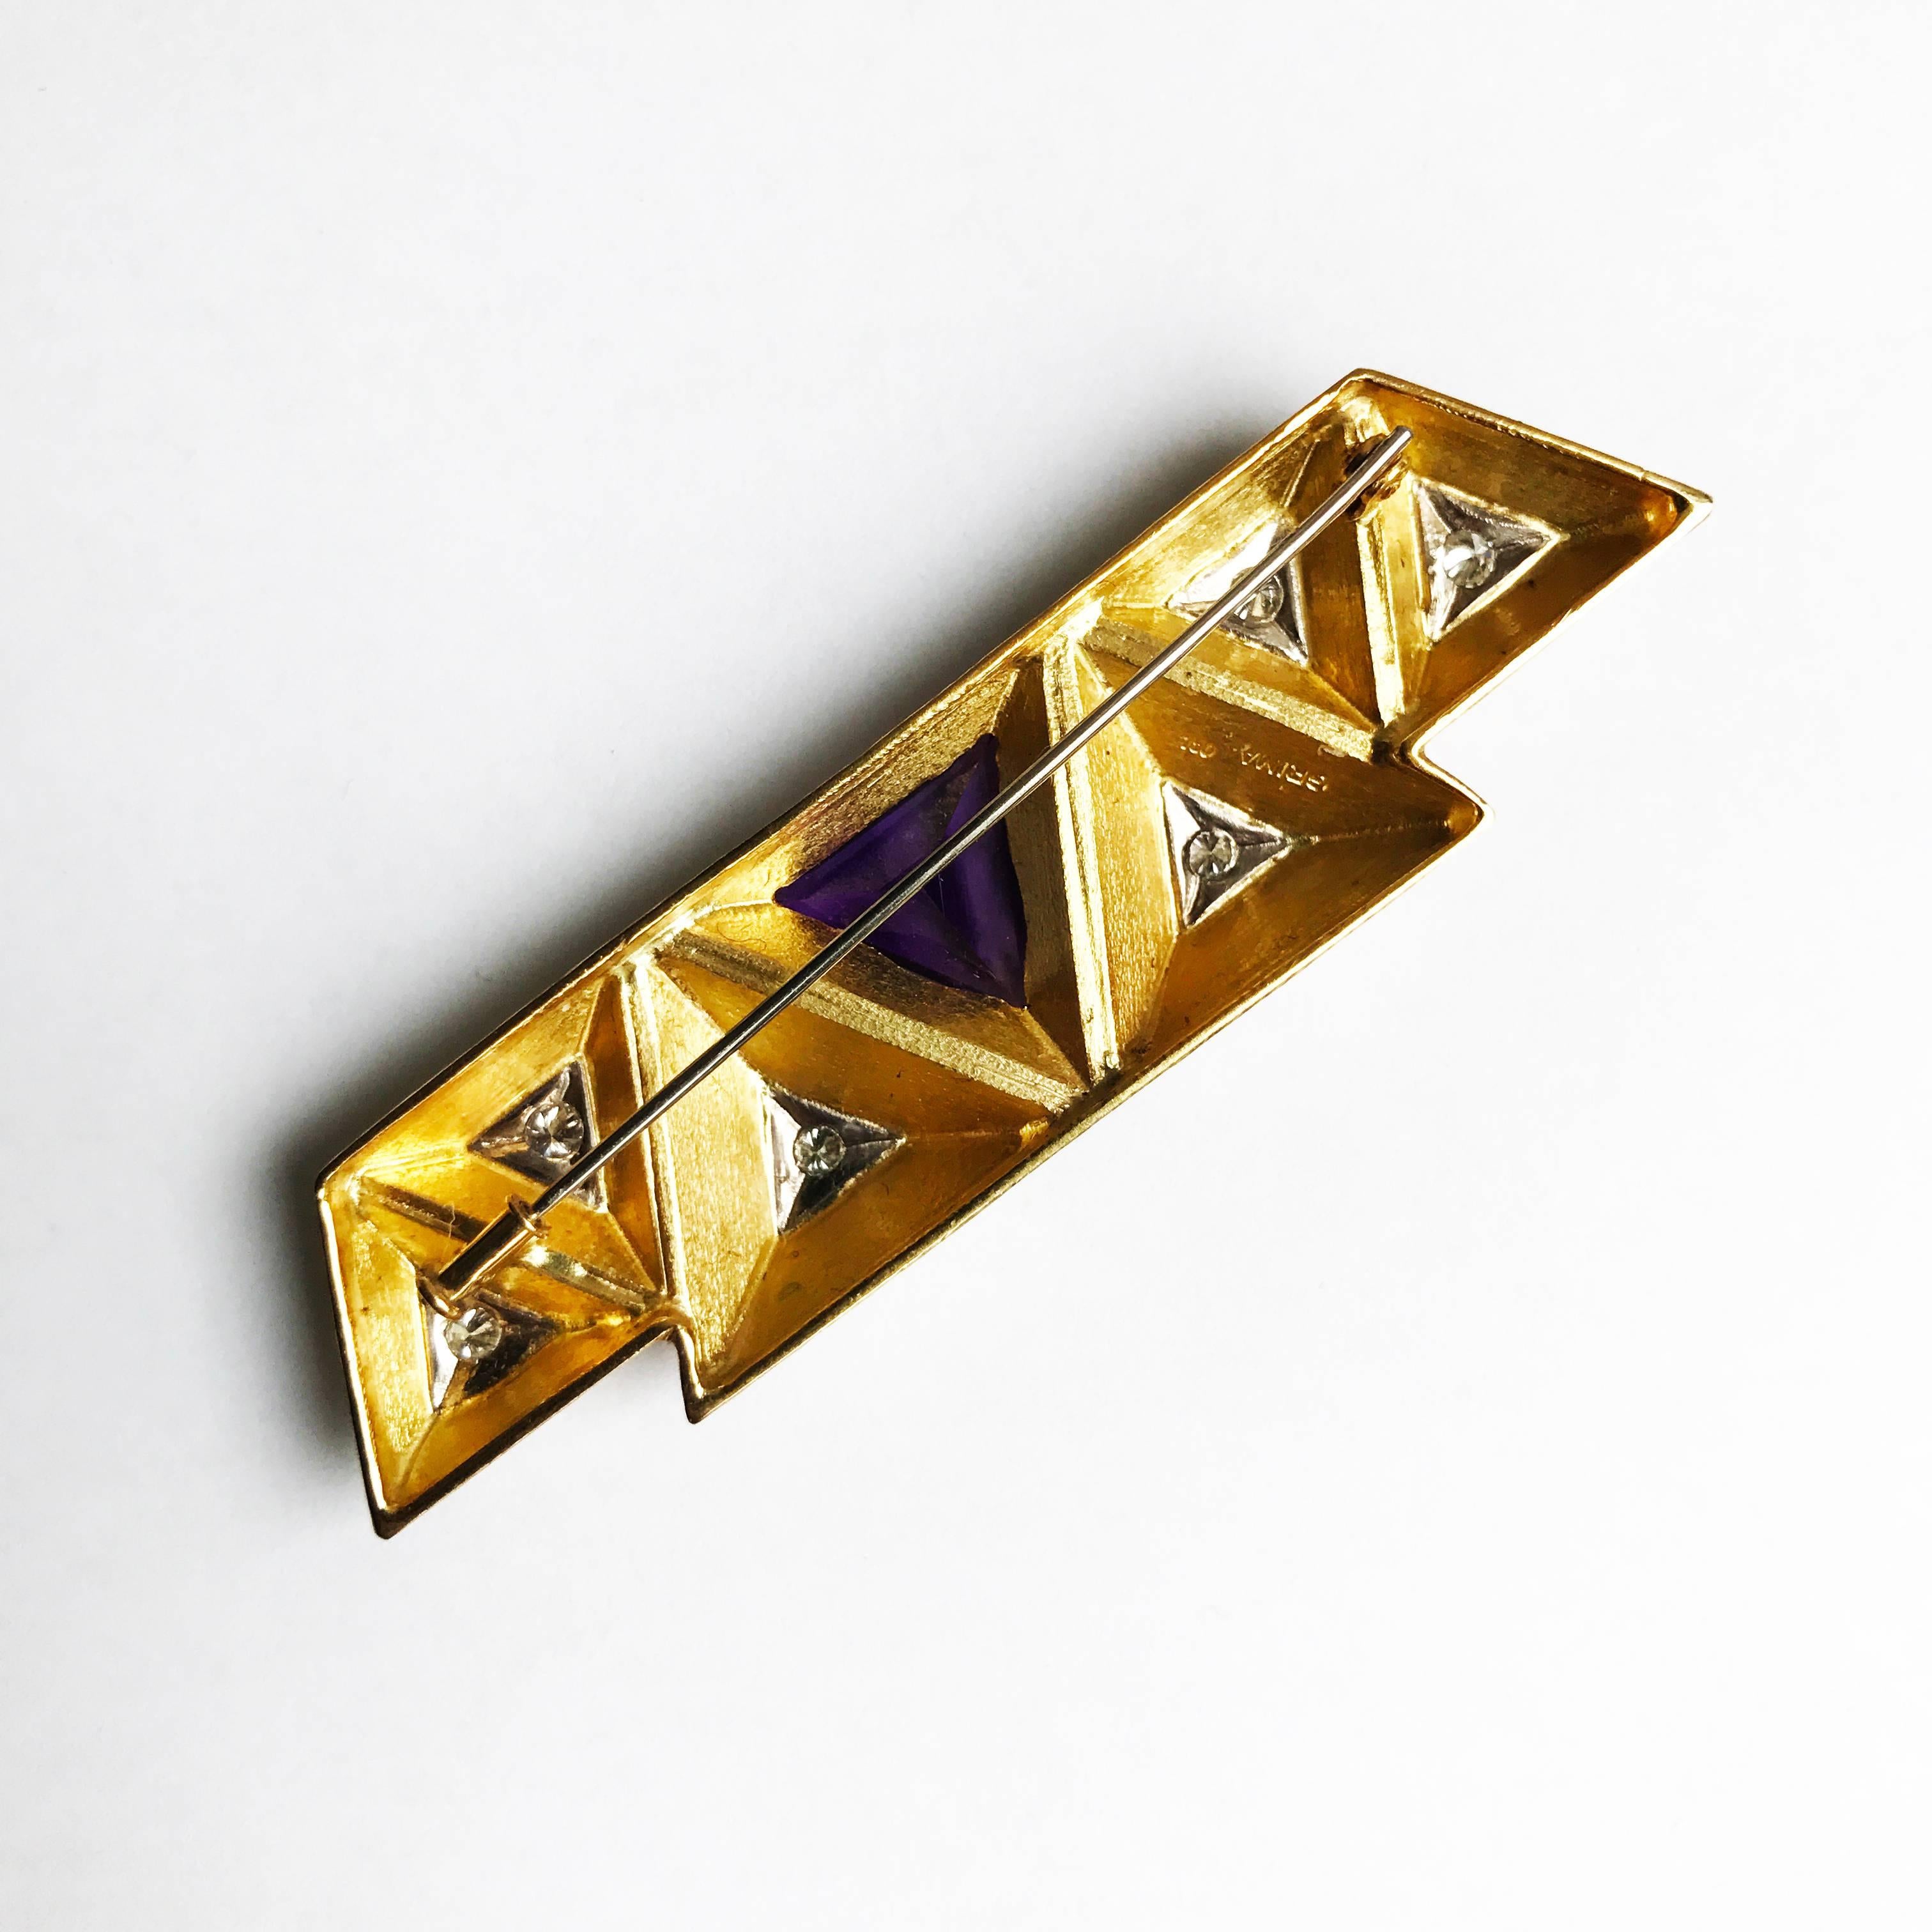 Designed by Andrew Grima in 2002

A yellow gold brooch set with 6 brilliant-cut diamonds in white gold and a triangular amethyst weighing 6.09cts. 

Signed GRIMA, 750

About Grima
Andrew Grima was one of a handful of British designers who